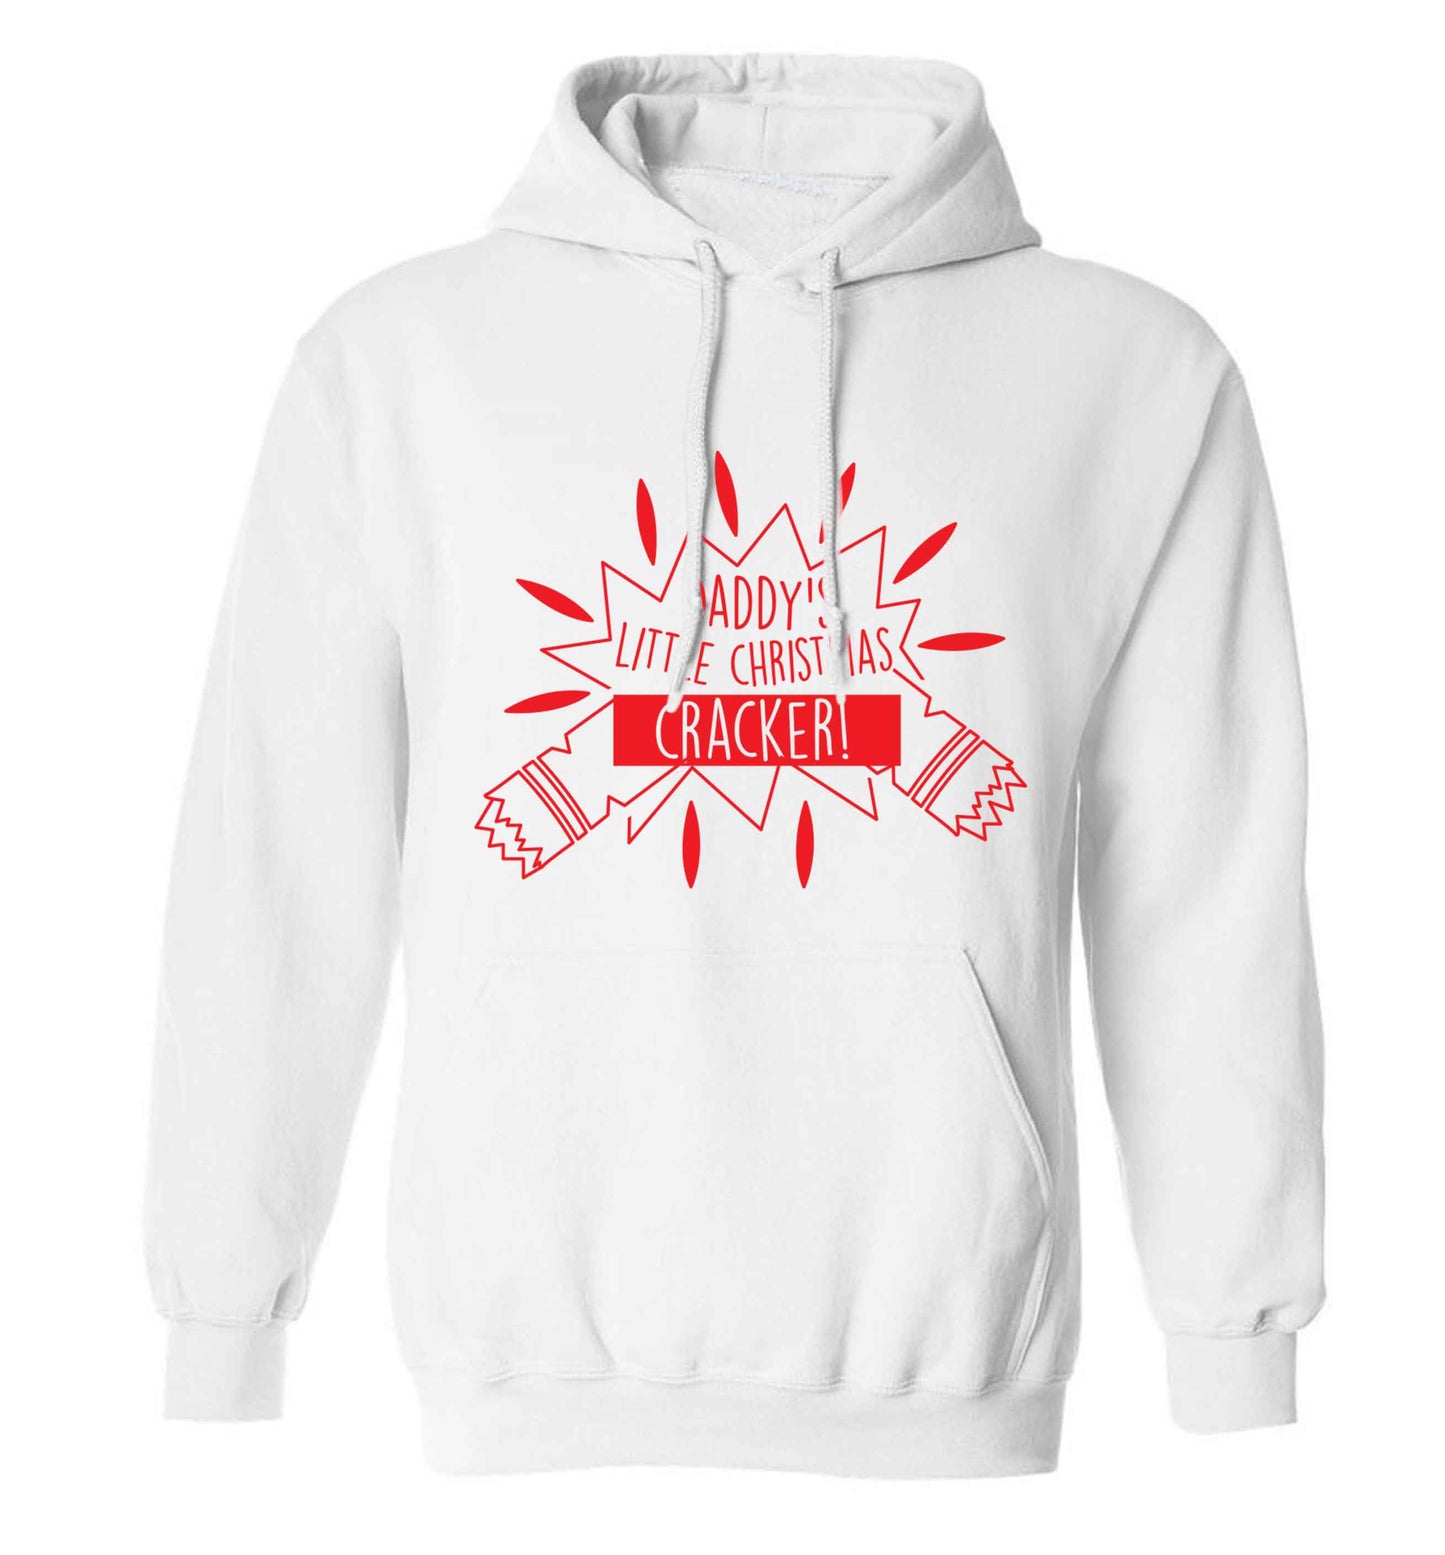 Daddy's little Christmas cracker adults unisex white hoodie 2XL